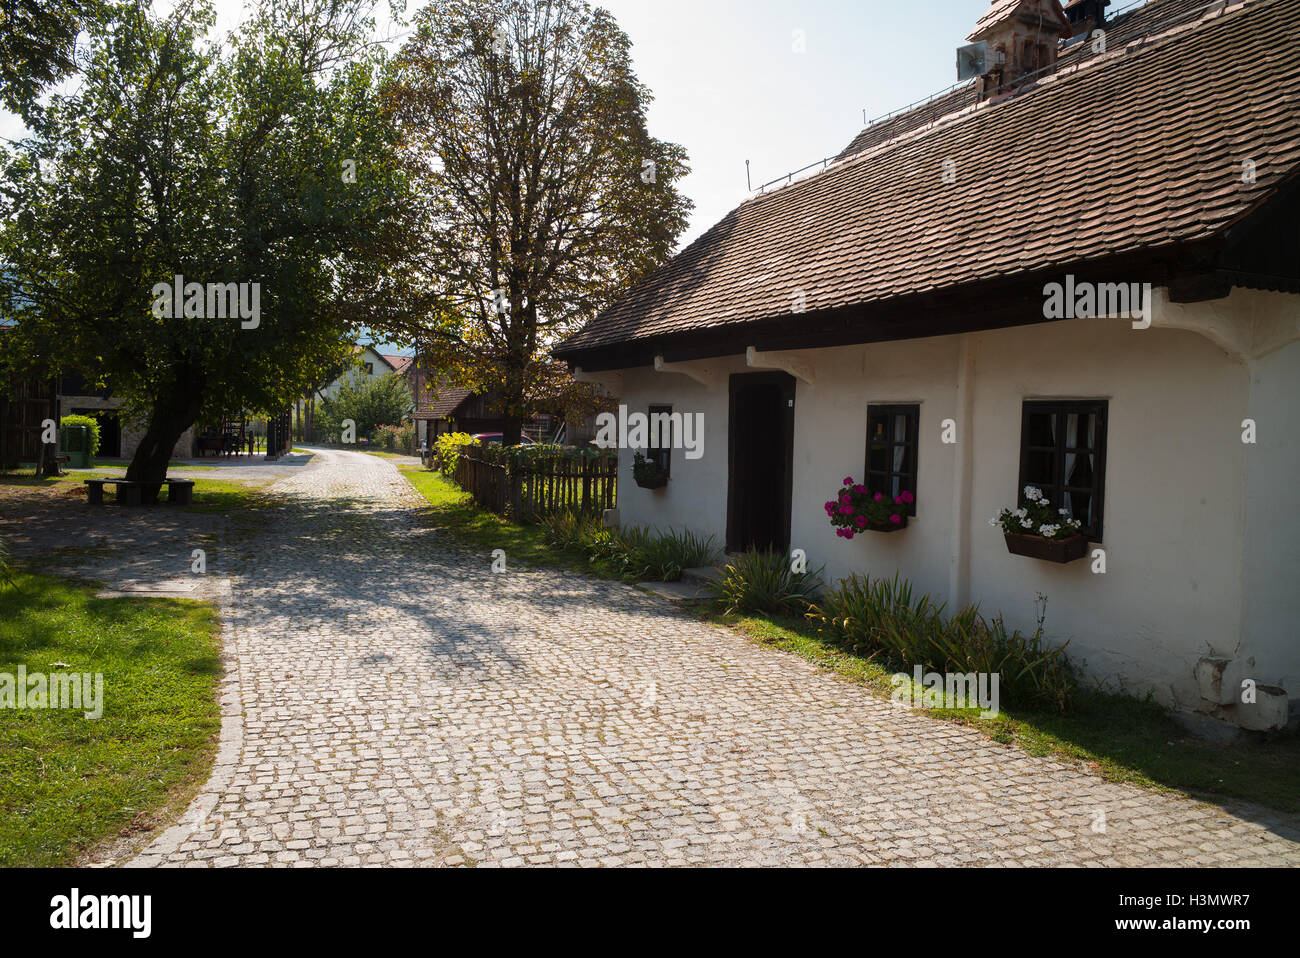 Cobbled lane and traditional house in Kumrovec, Croatia Stock Photo